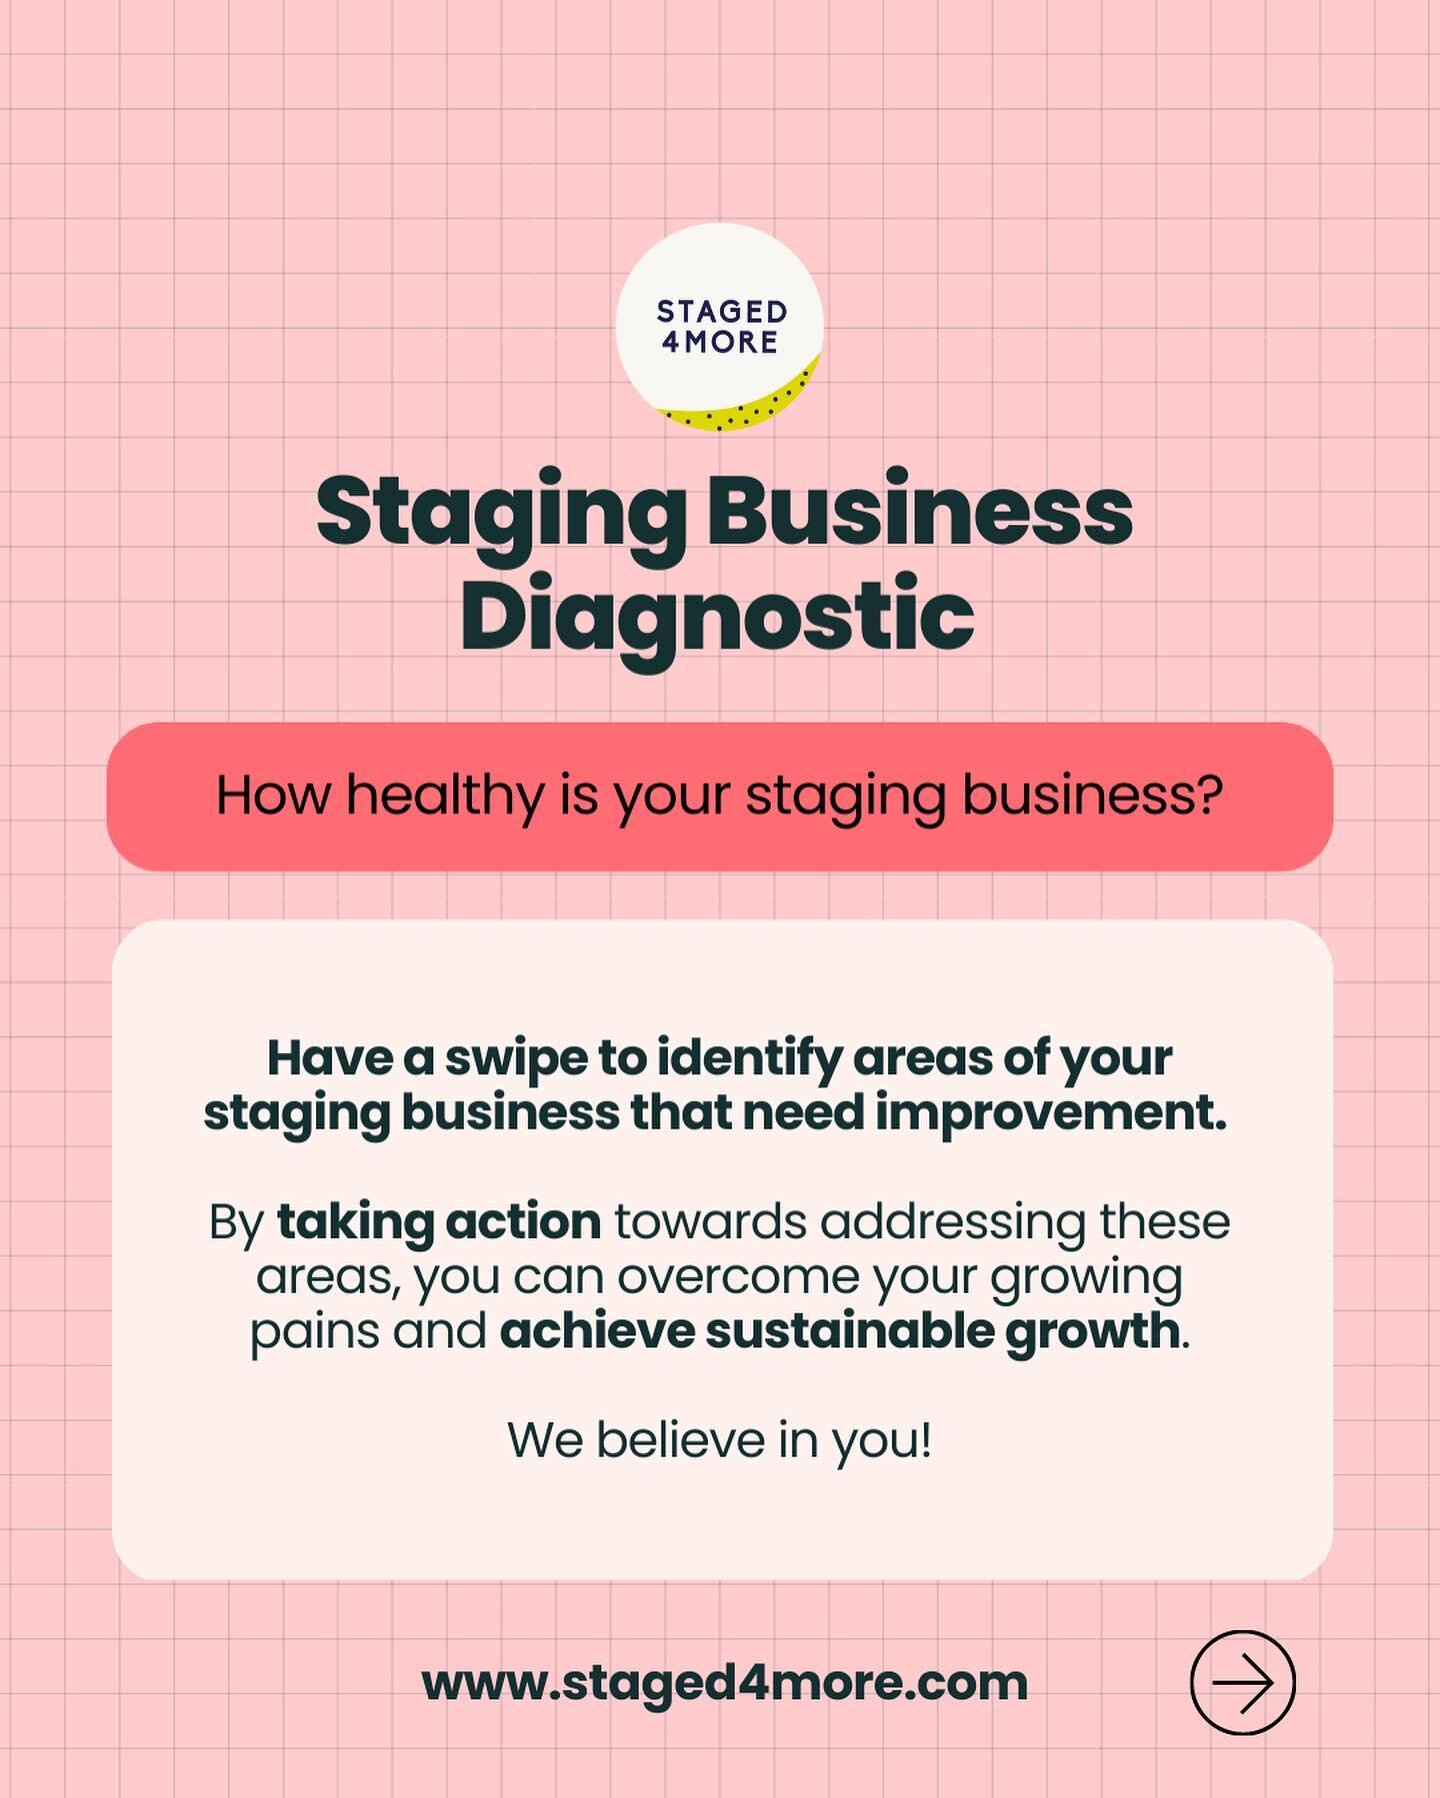 Swipe through our Home Staging Business Diagnostic and identify the pain points that have been holding you back!

From workflow to business goals, we've got you covered. If you answered 'no' to at least one question in each area, it's time to tak